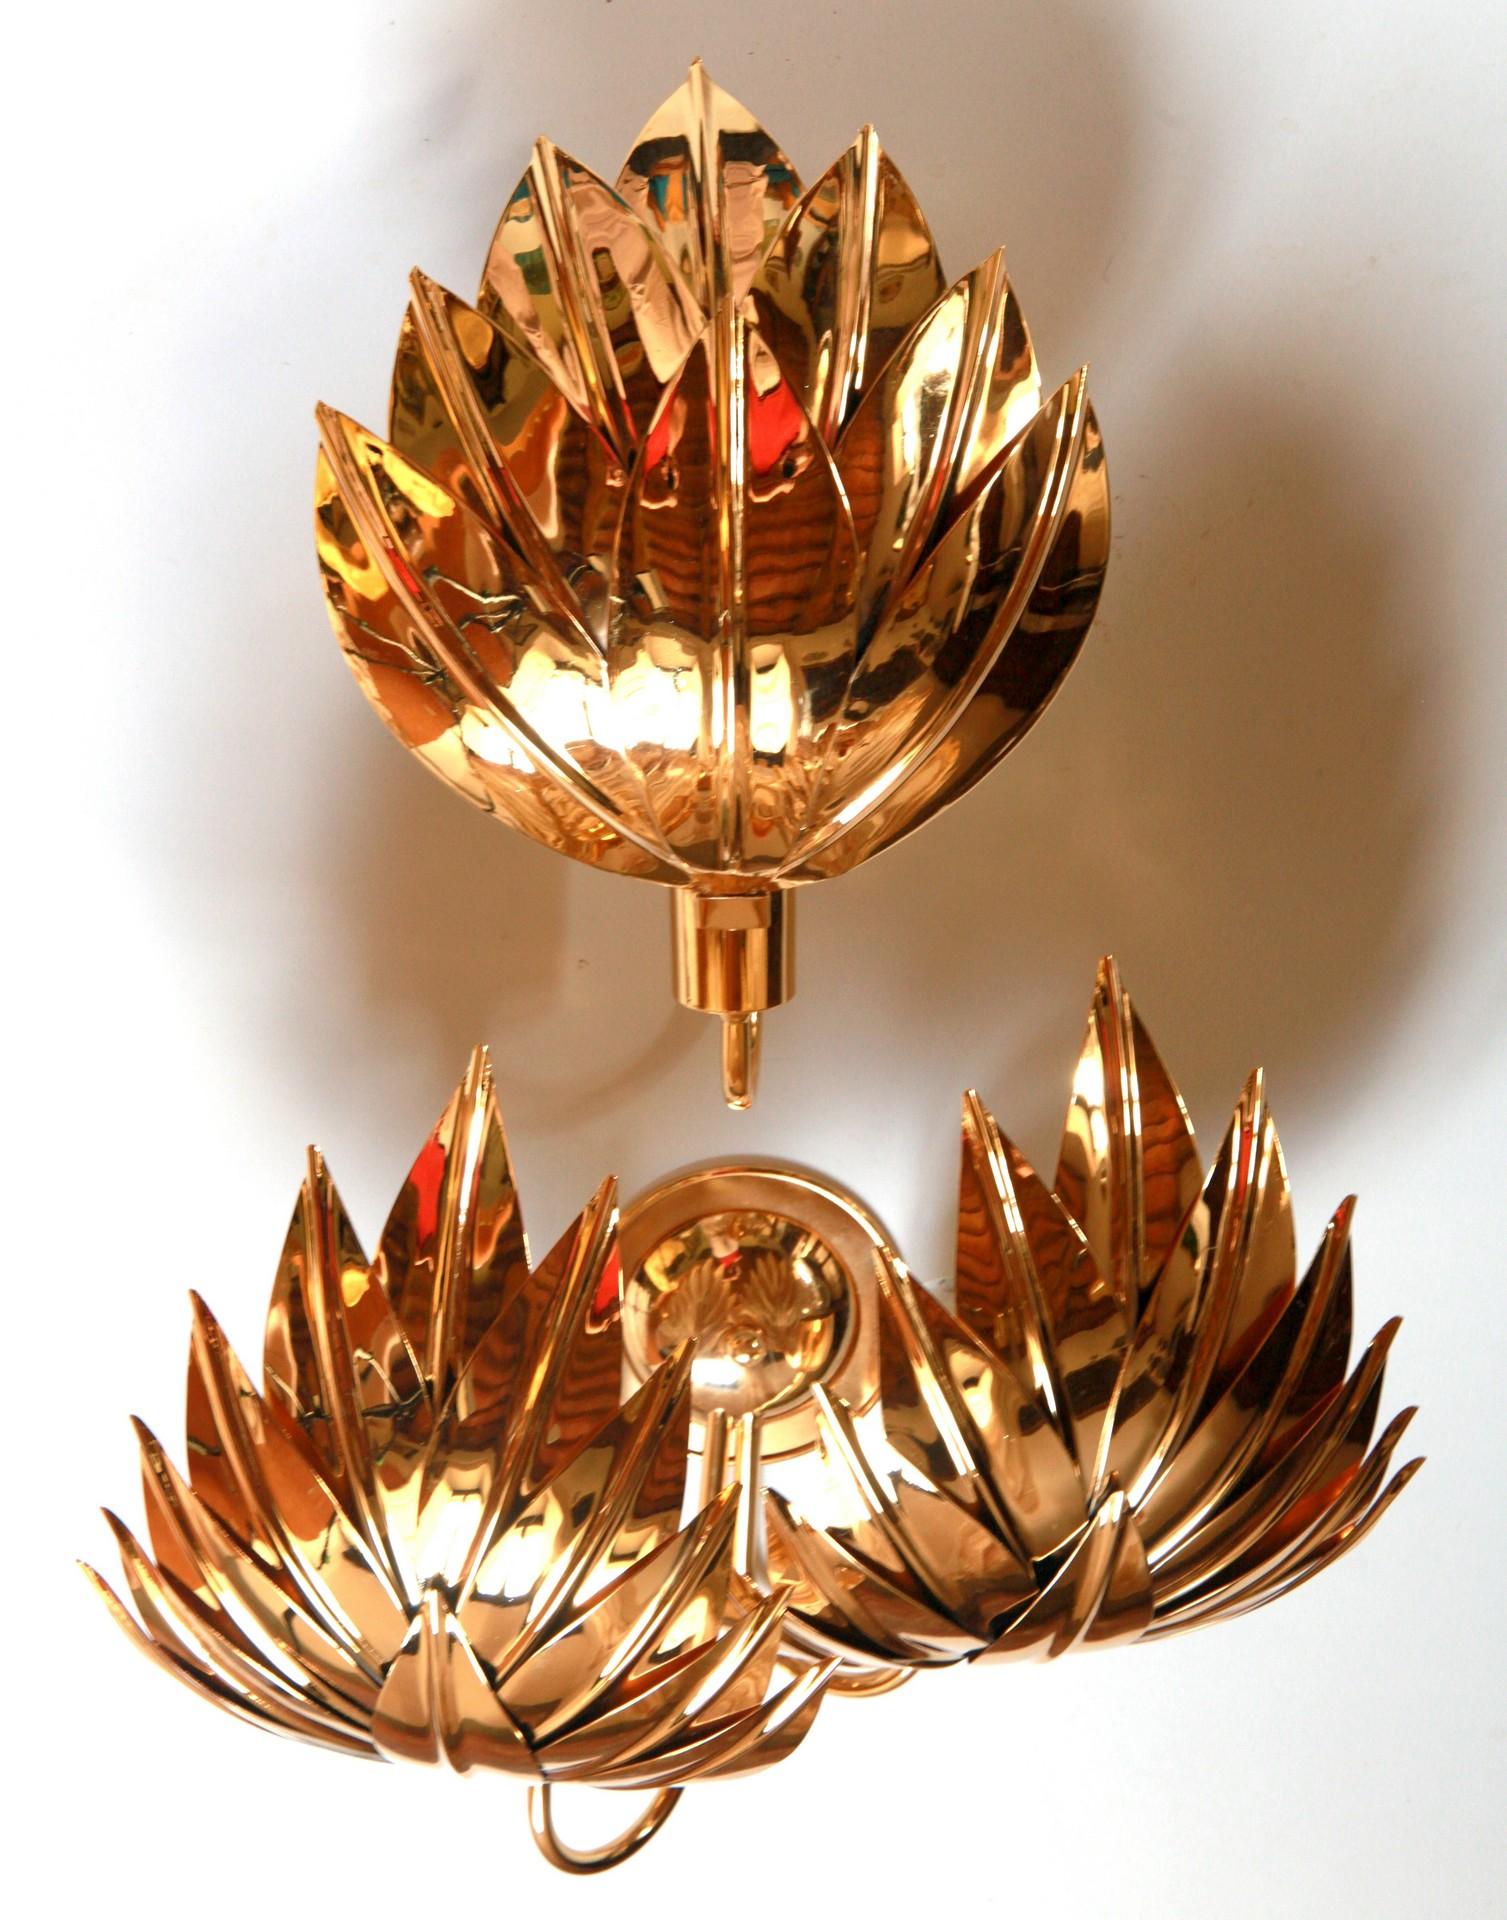 This listing is for the full set of 9 Sconces. 

The sconces were showing some age for regular use and gold discoloration. I have had them completely re-polished and gilded with thick gold plating and re-wired.

I am listing with Jansen (Maison